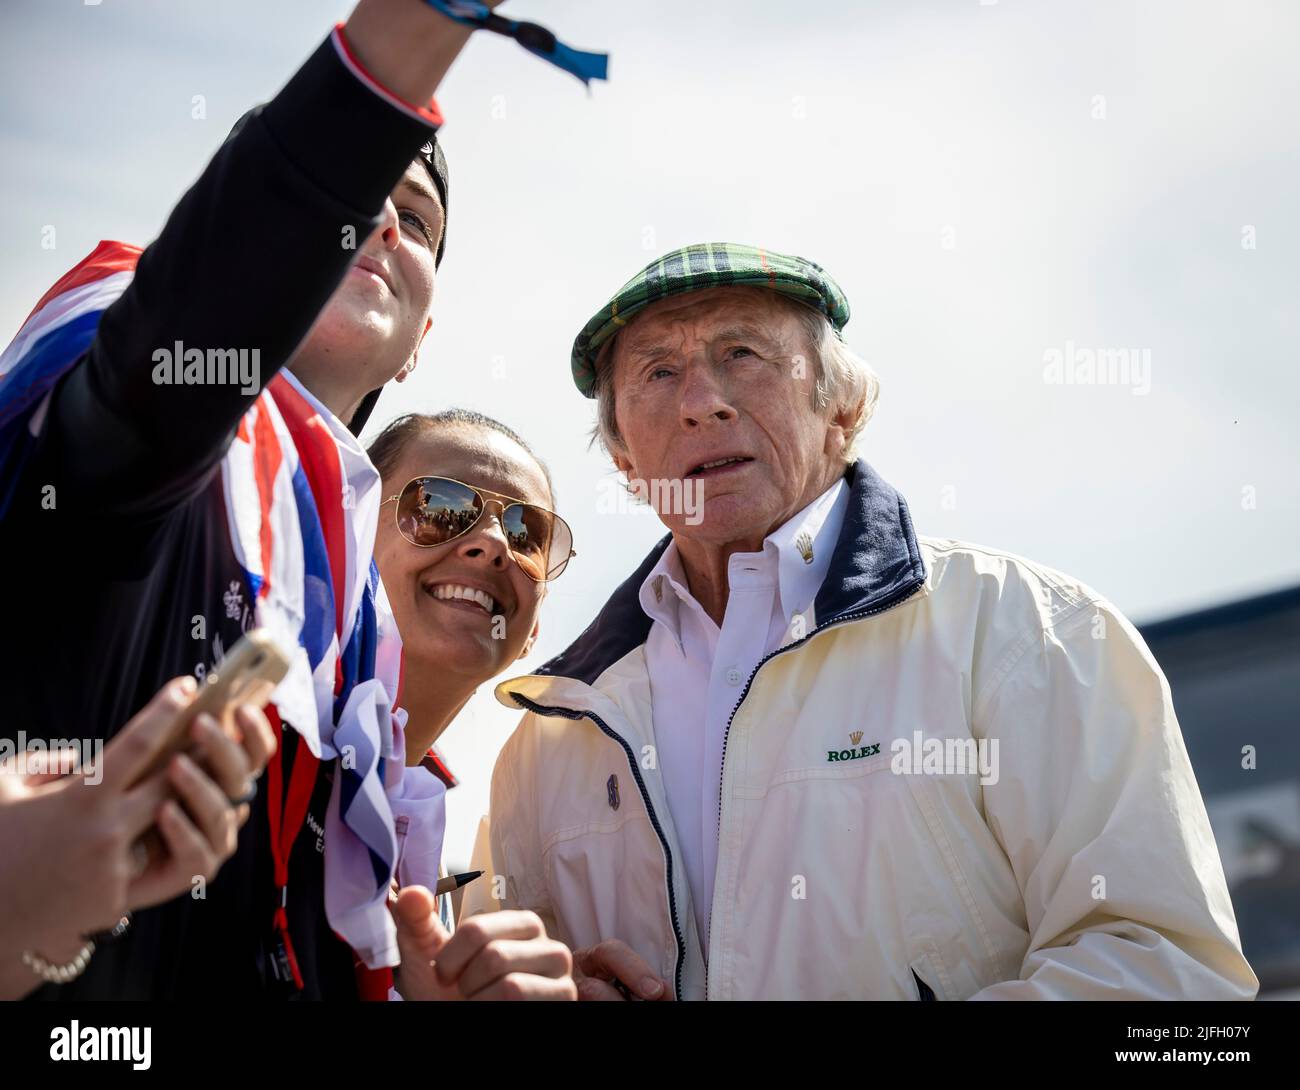 Silverstone, UK. 3rd July 2022, Silverstone Circuit, Silverstone, Northamptonshire, England: British F1 Grand Prix, Race day: Sir Jackie Stewart poses for a selfie Credit: Action Plus Sports Images/Alamy Live News Stock Photo